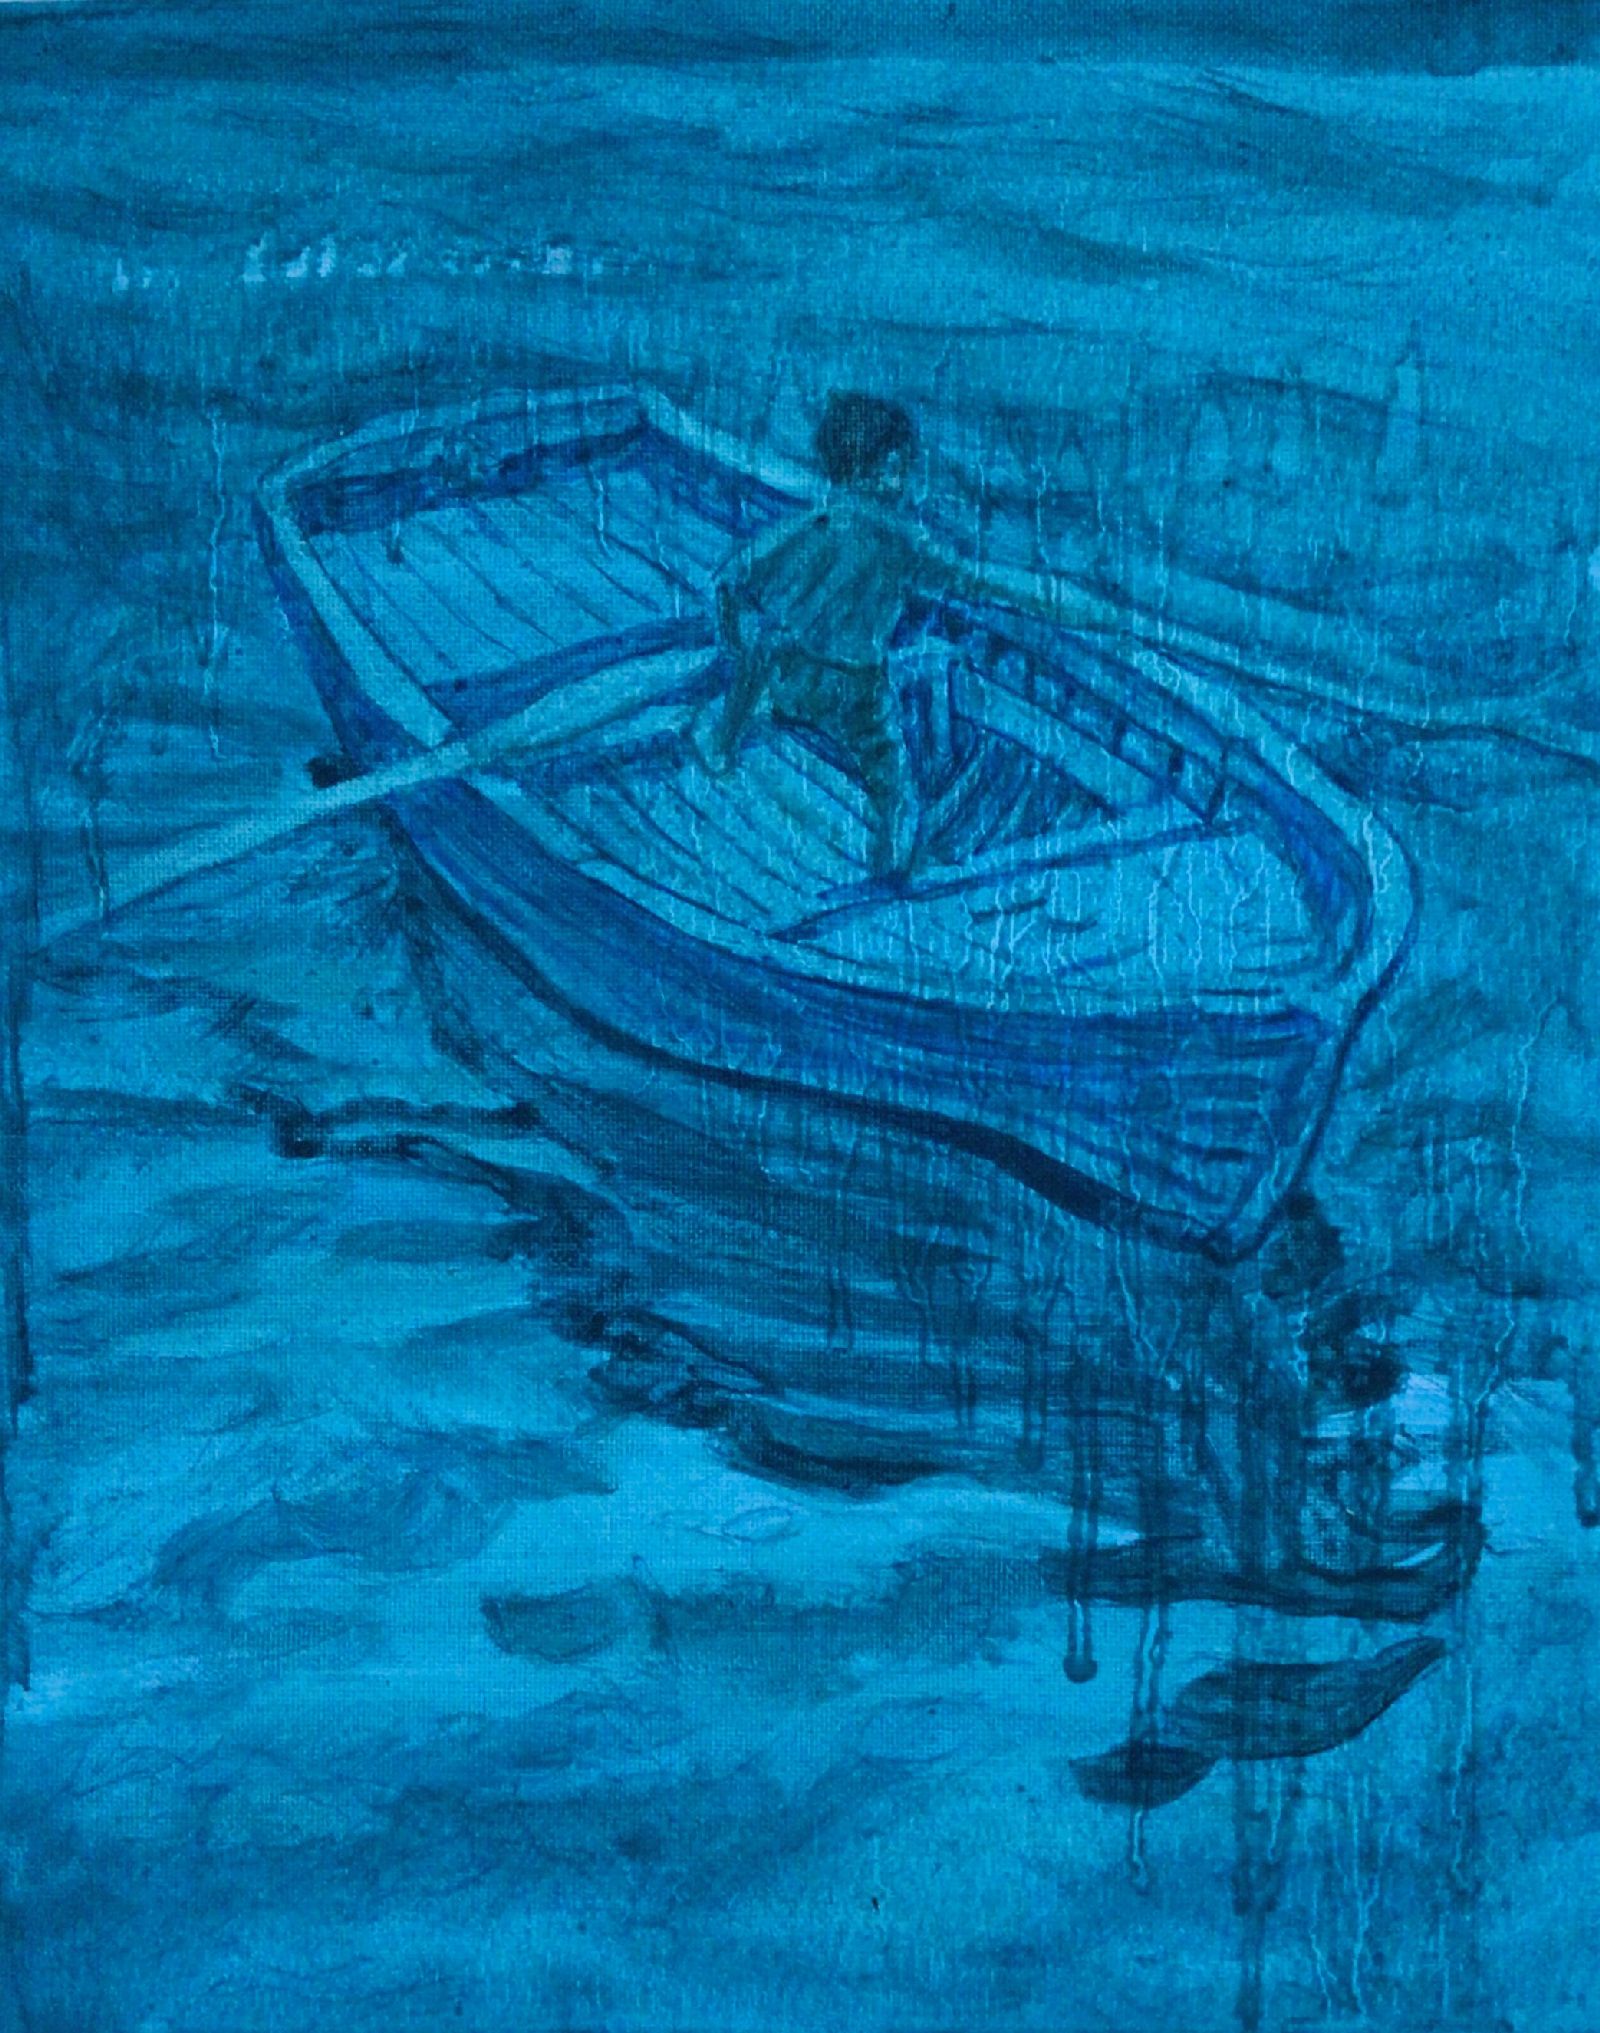 Boy on Boat by Christopher Banahan